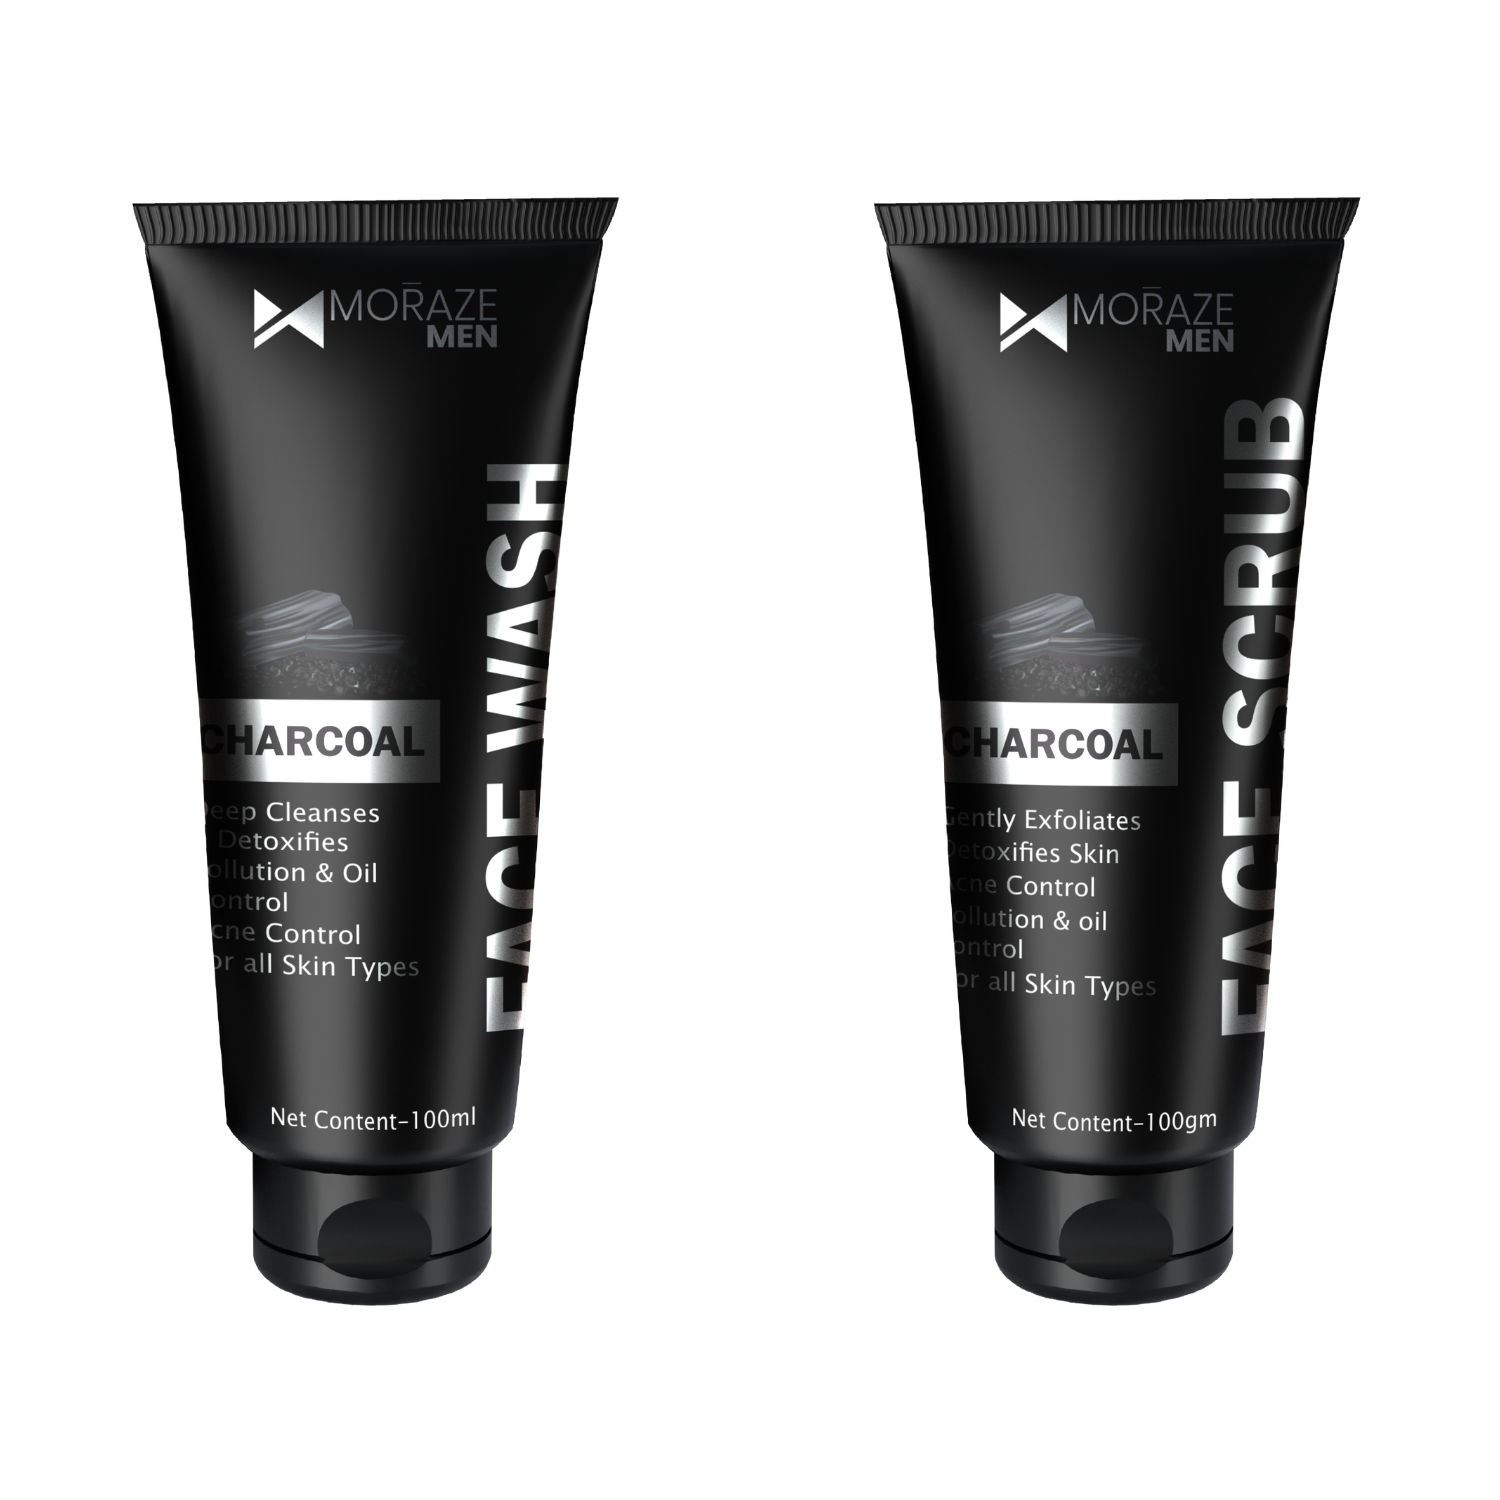 Moraze Men Activated Charcoal Pollution &amp; Oil Control Face Scrub &amp; Face Wash for Deep Pore Cleansing, 200 GM |  Pack of 2 | Detoxifies Skin &amp; Control Acne | Suitable for Men of All Skin Type